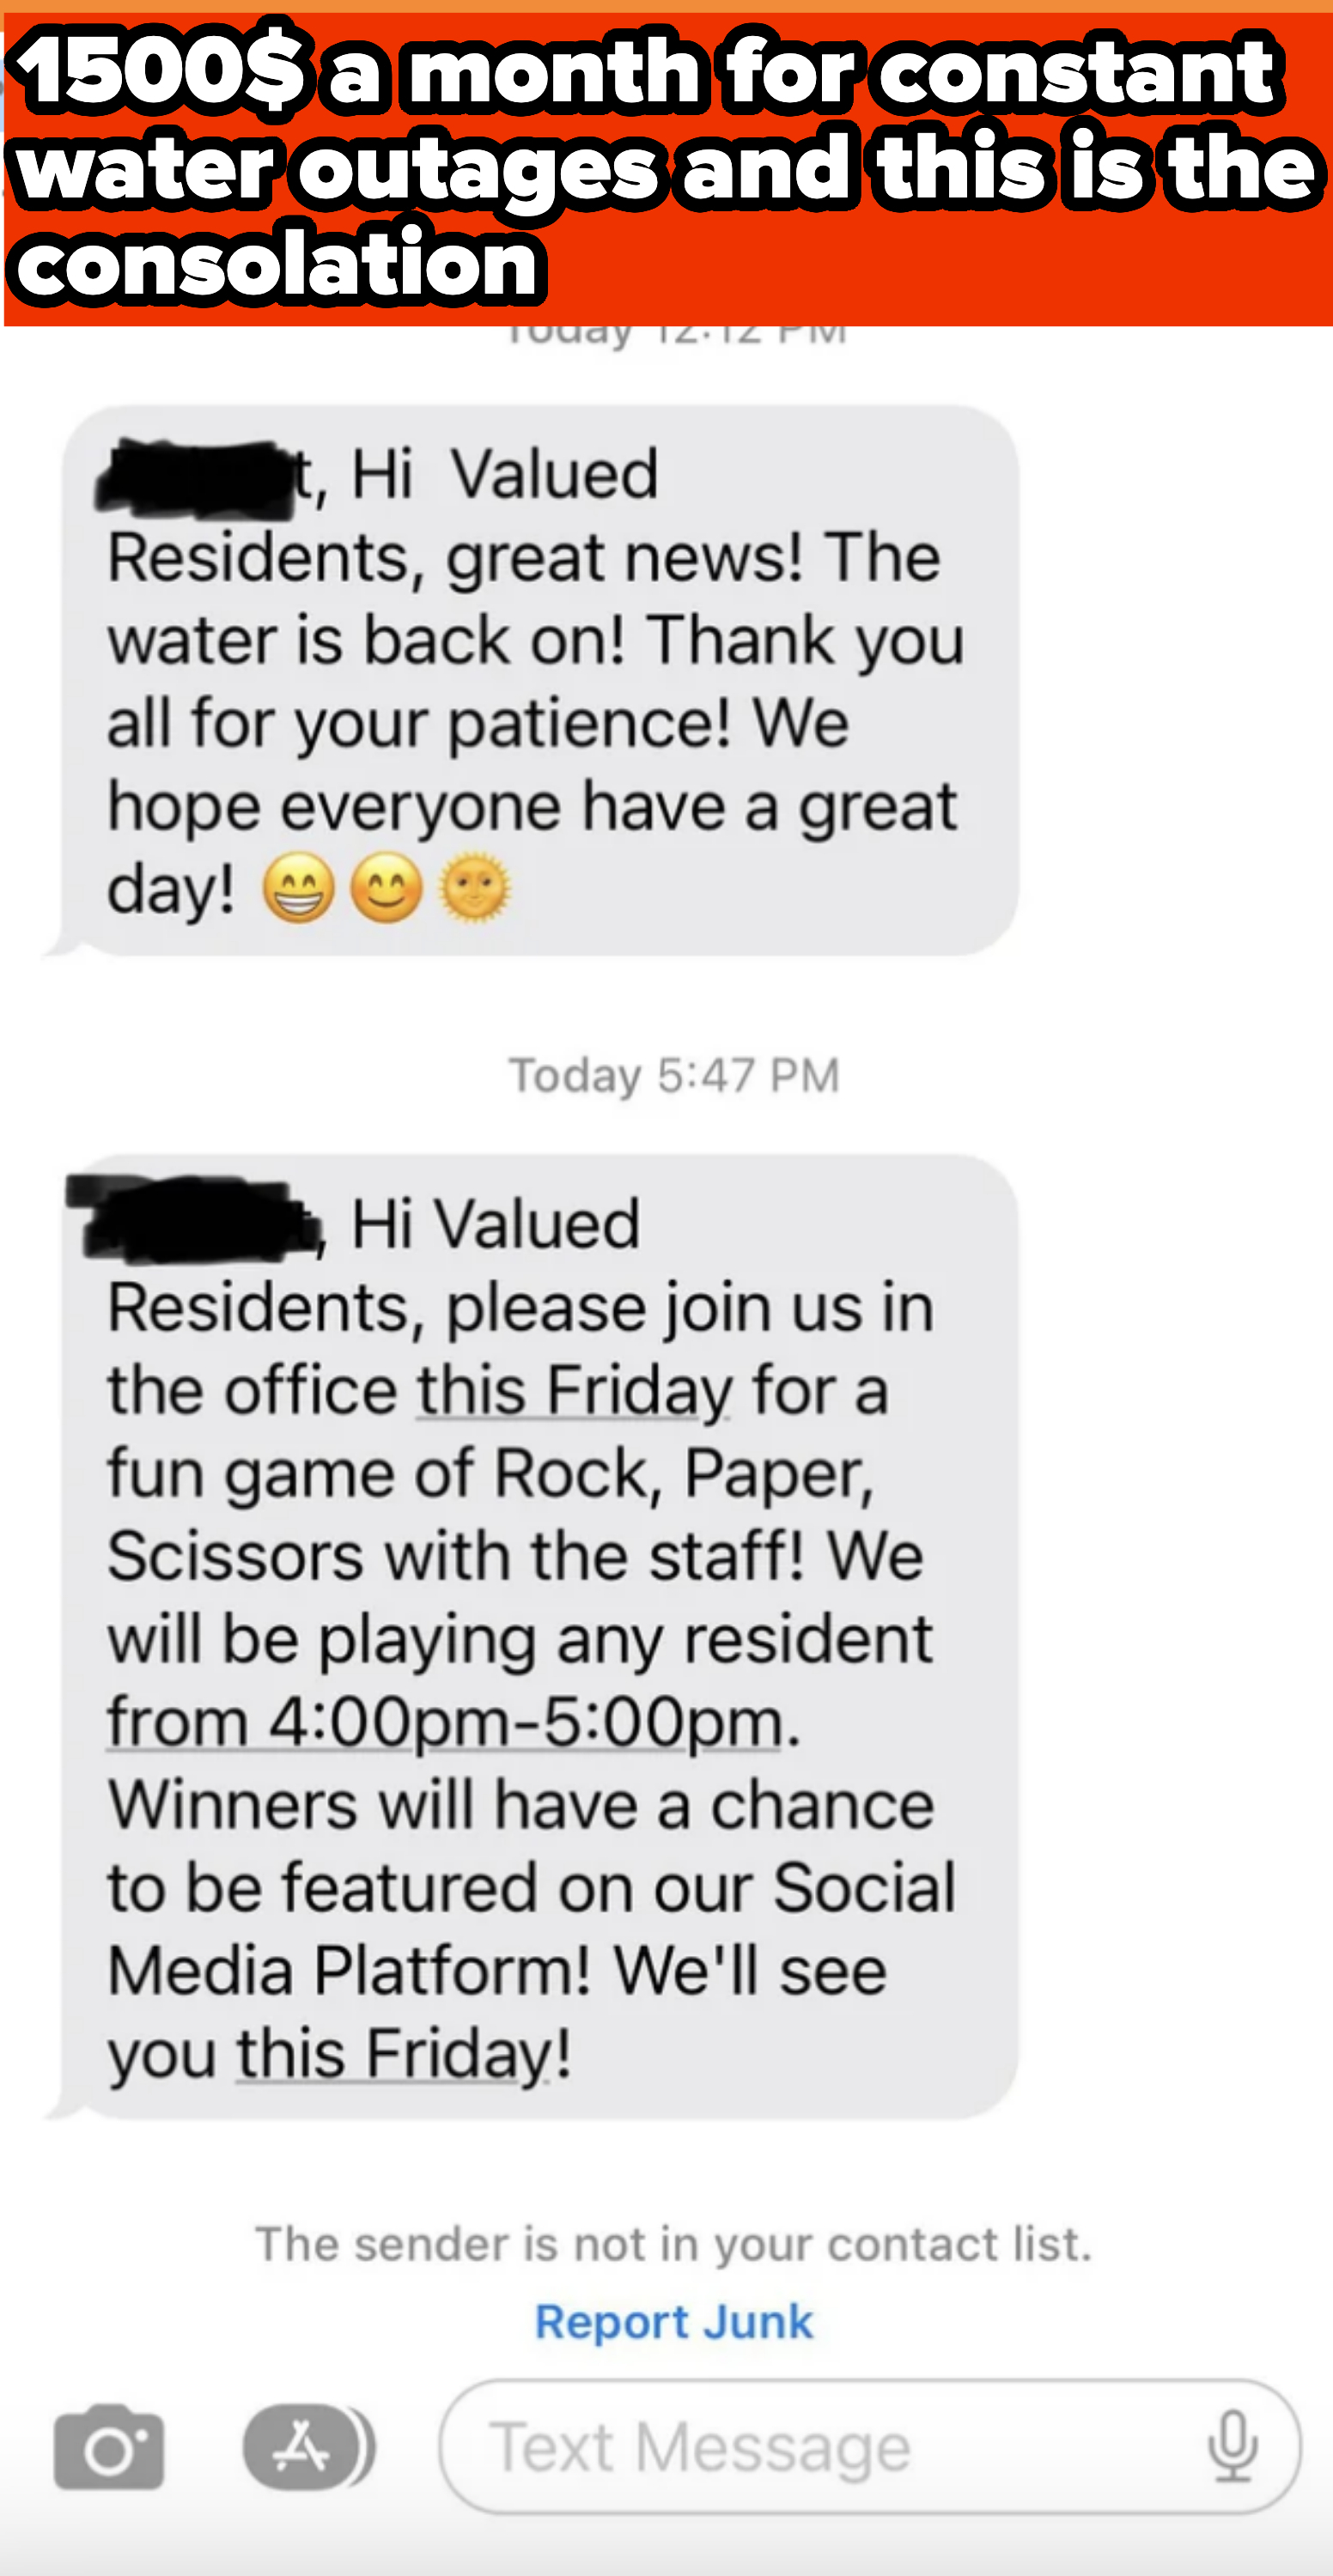 Text messages about water restoration and an upcoming office event with games and social media sharing. Recipient names redacted